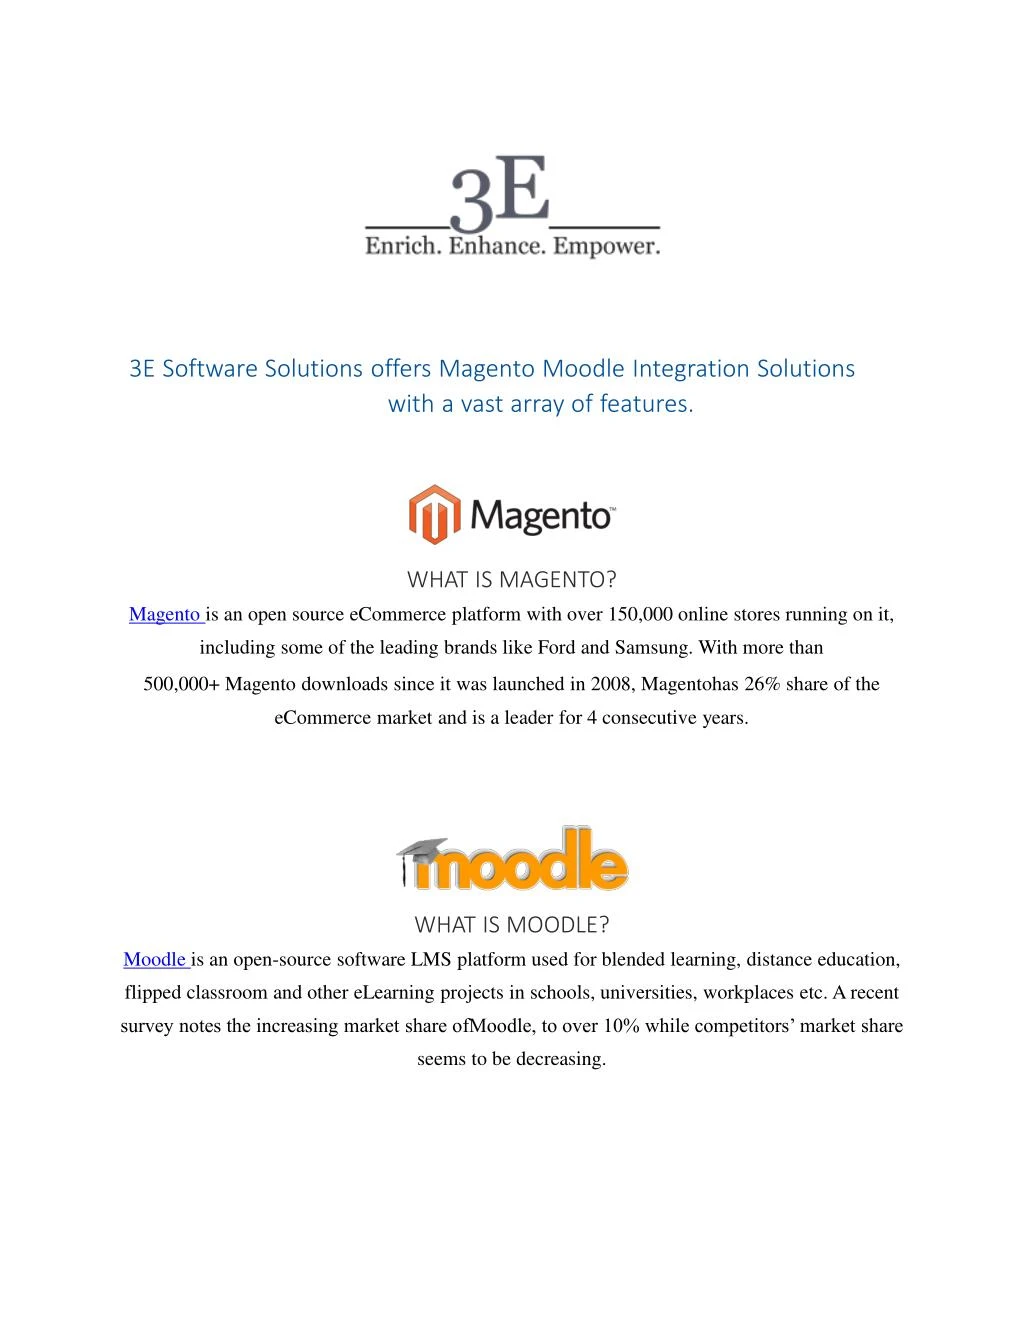 3e software solutions offers magento moodle